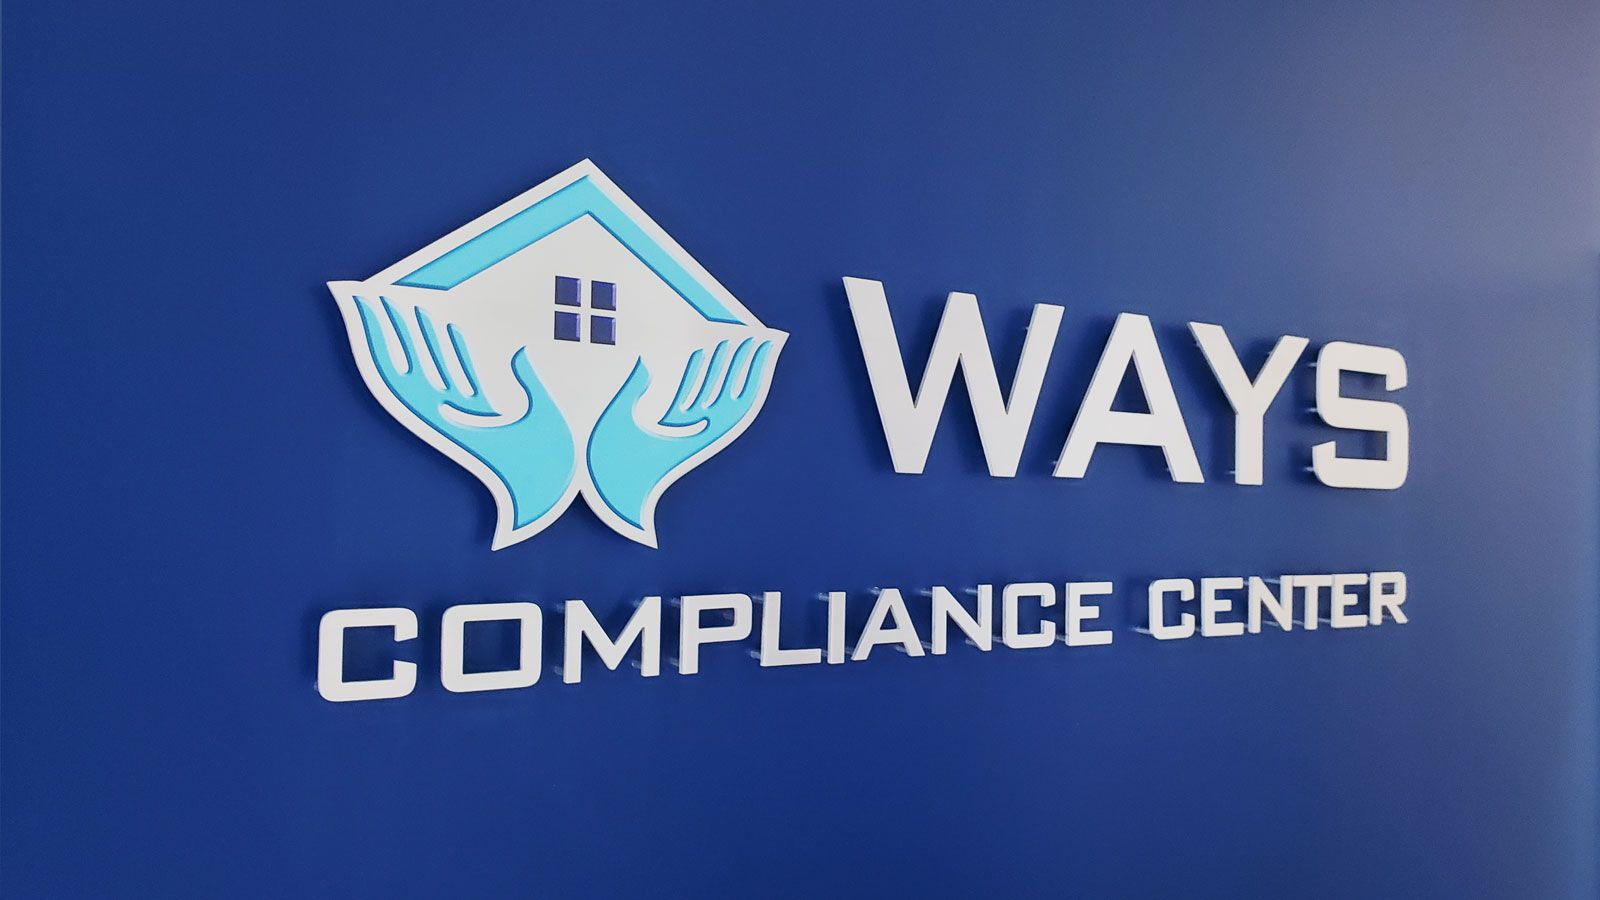 Ways Compliance Center 3d logo sign and brand name letters made of brushed aluminum